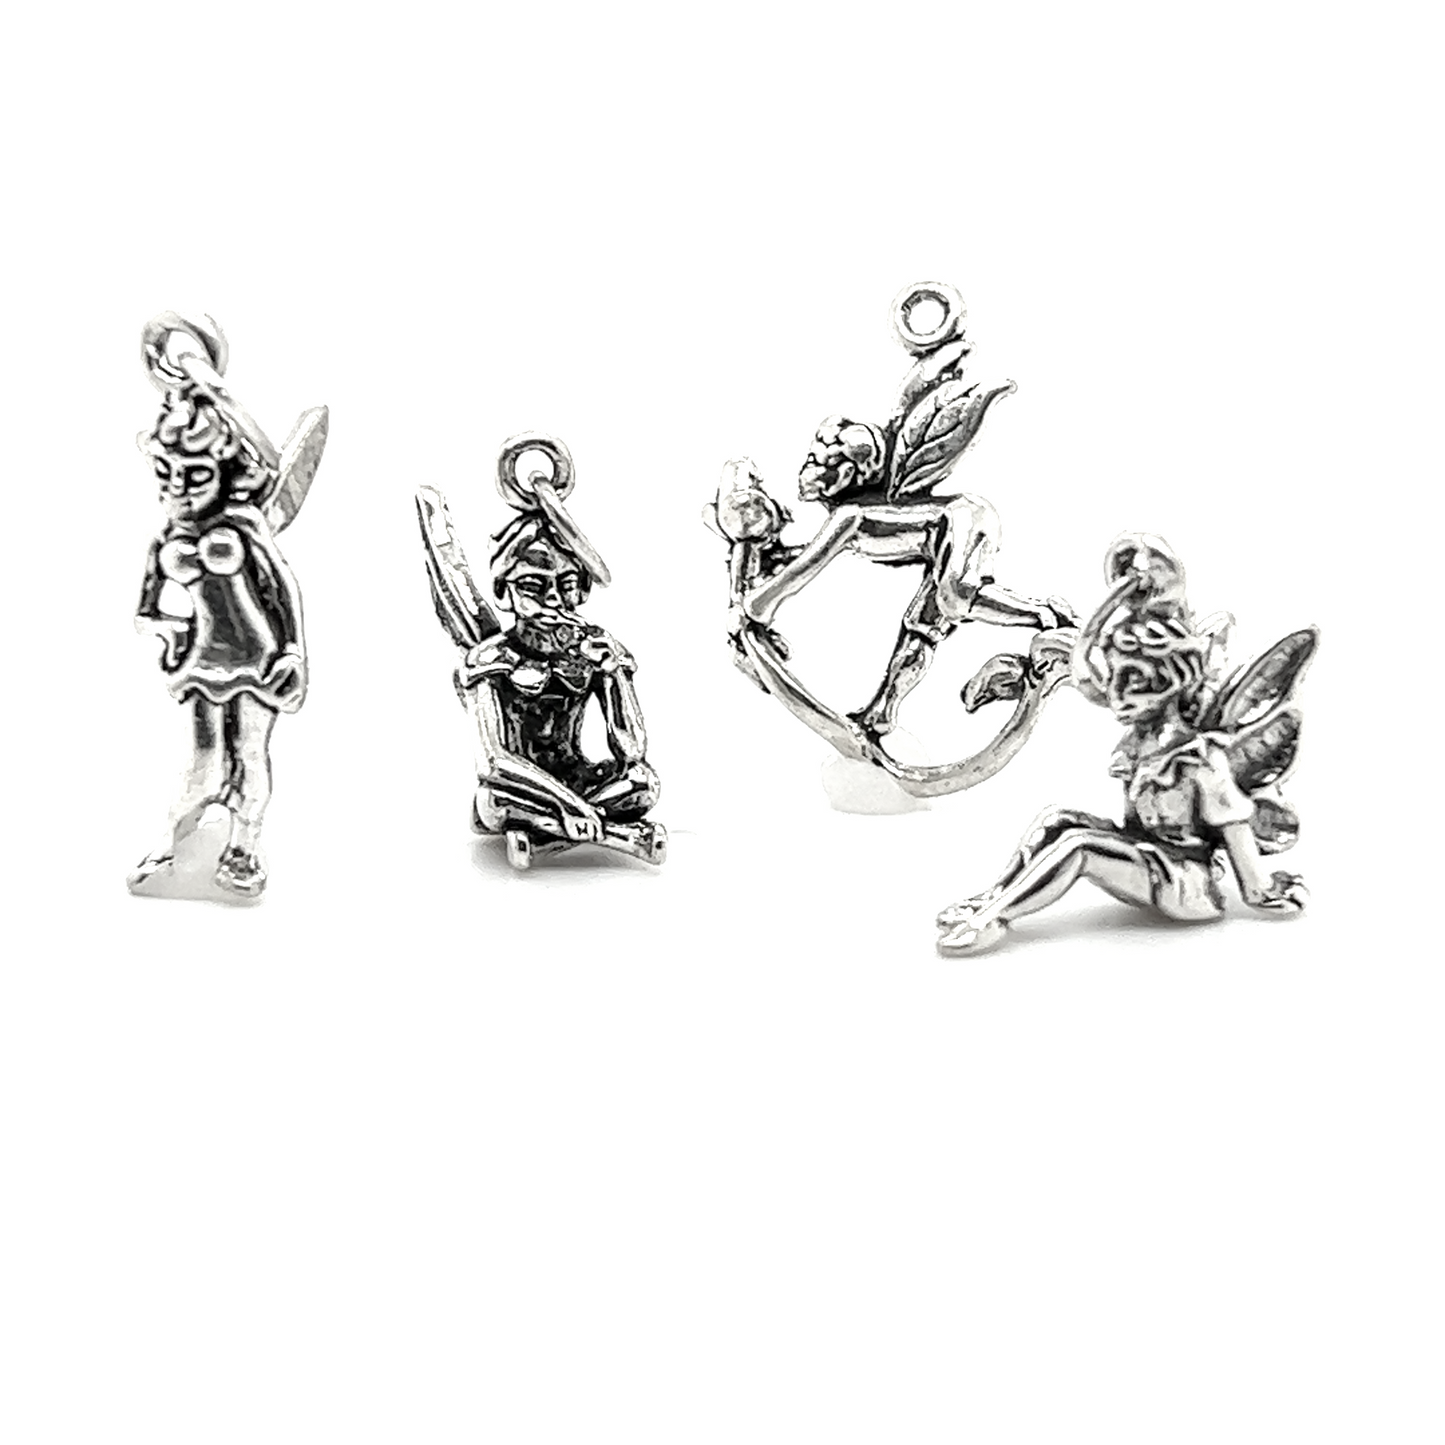 Experience the enchantment of Pixie Magic with our dazzling Pixie Charms from the Super Silver Pixie Fairy Charm Collection.